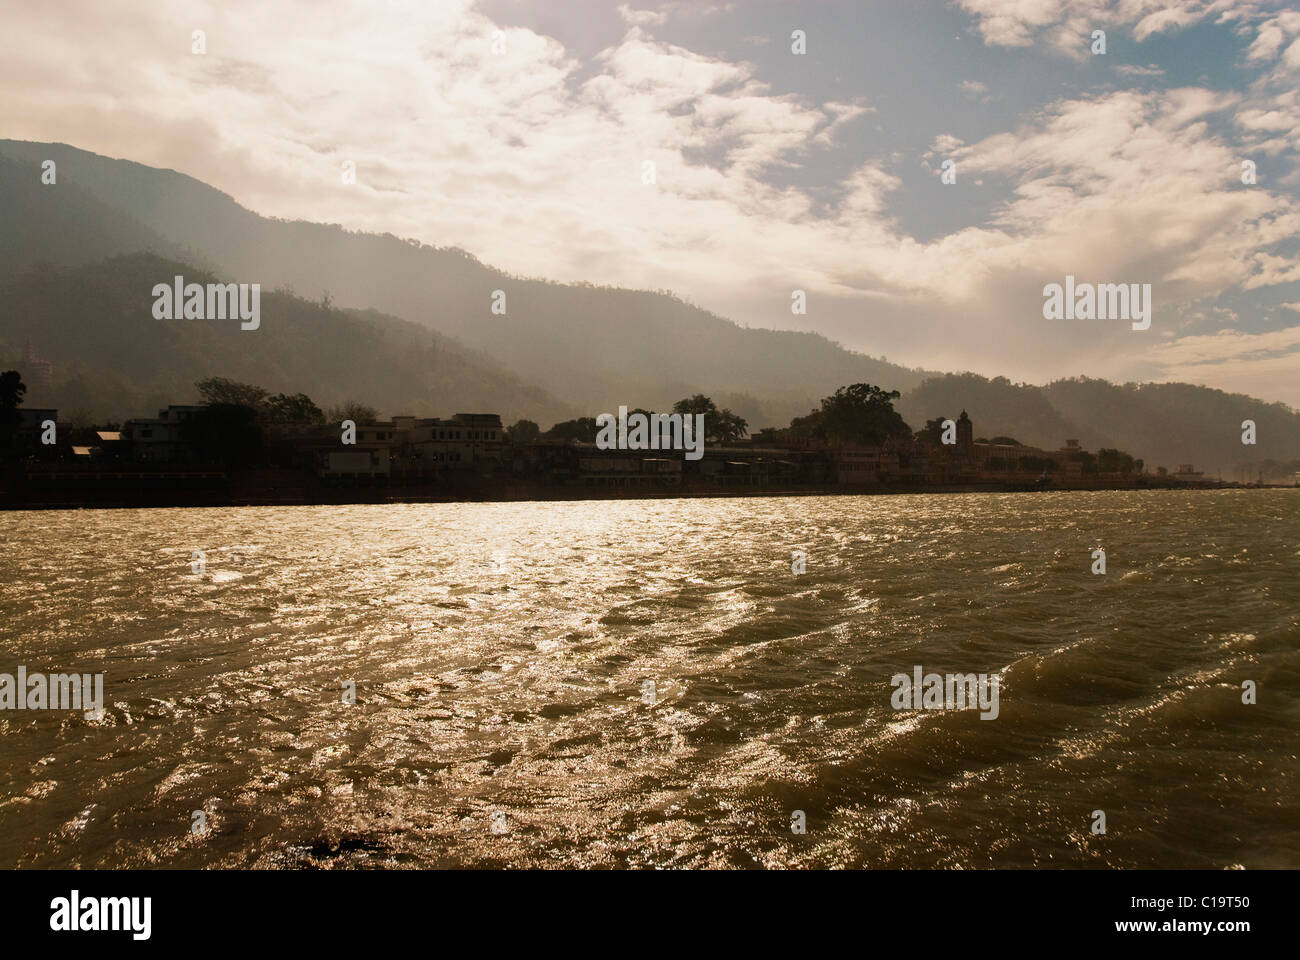 River with mountains in the background, Ganges River, Rishikesh, Uttarakhand, India Stock Photo